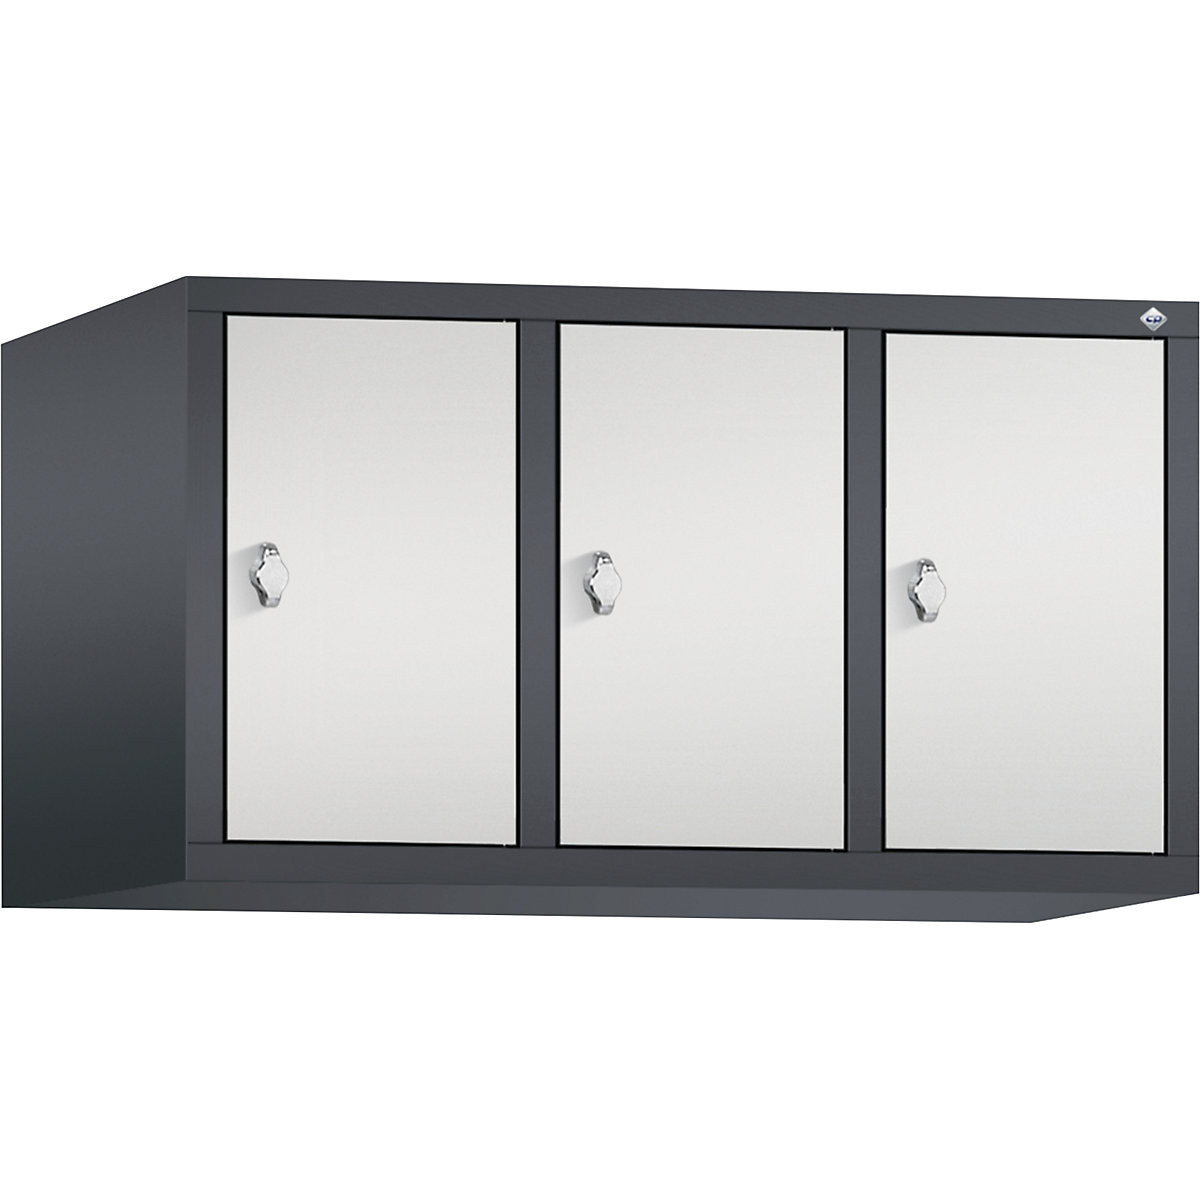 CLASSIC add-on cupboard – C+P, 3 compartments, compartment width 300 mm, black grey / light grey-12